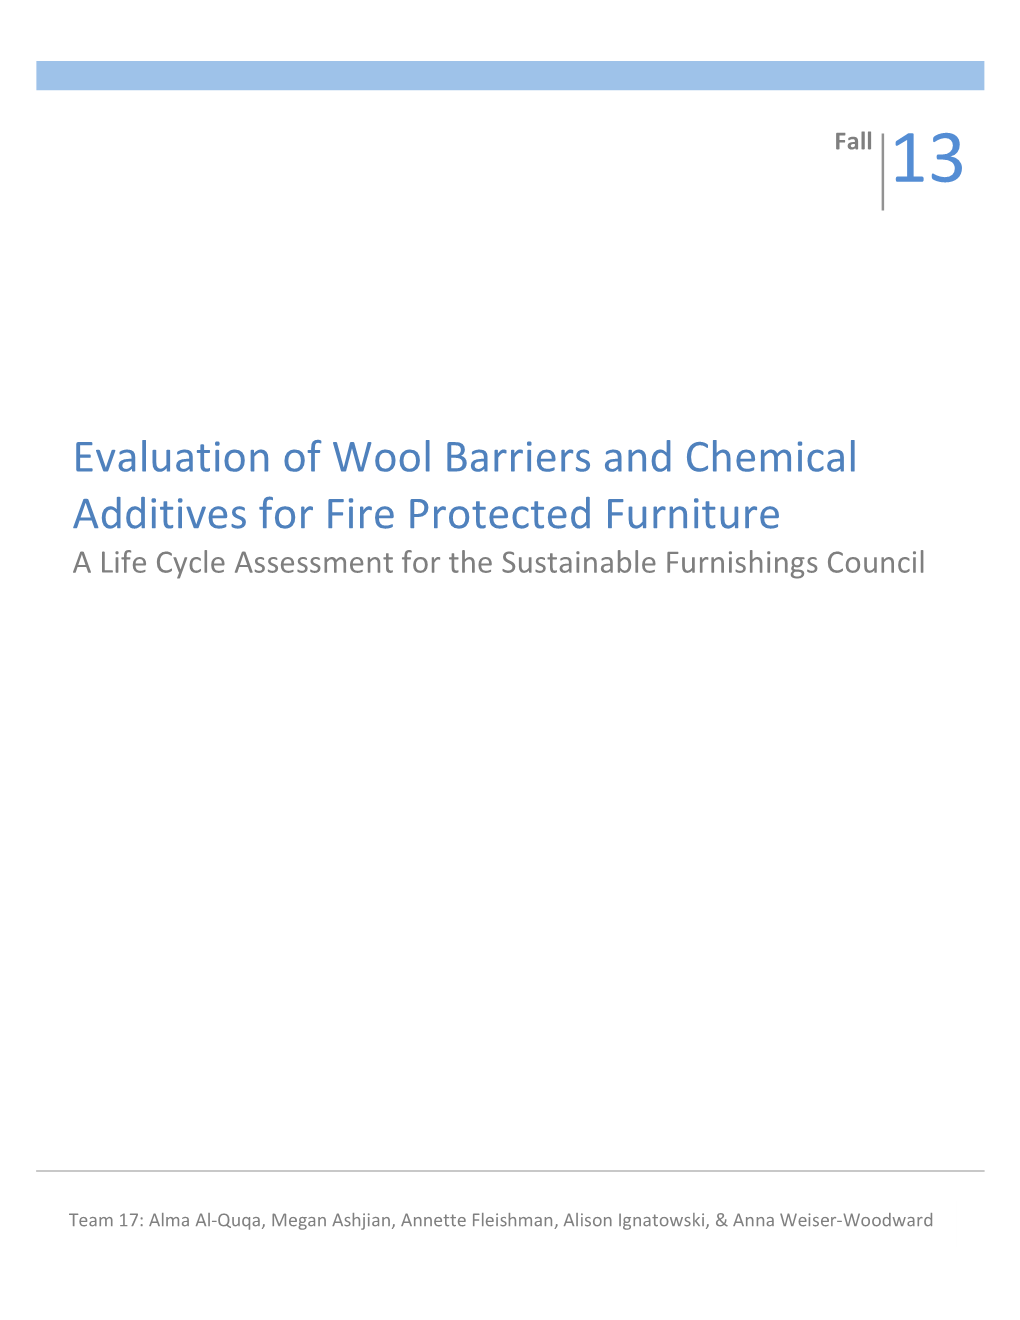 Evaluation of Wool Barriers and Chemical Additives for Fire Protected Furniture a Life Cycle Assessment for the Sustainable Furnishings Council